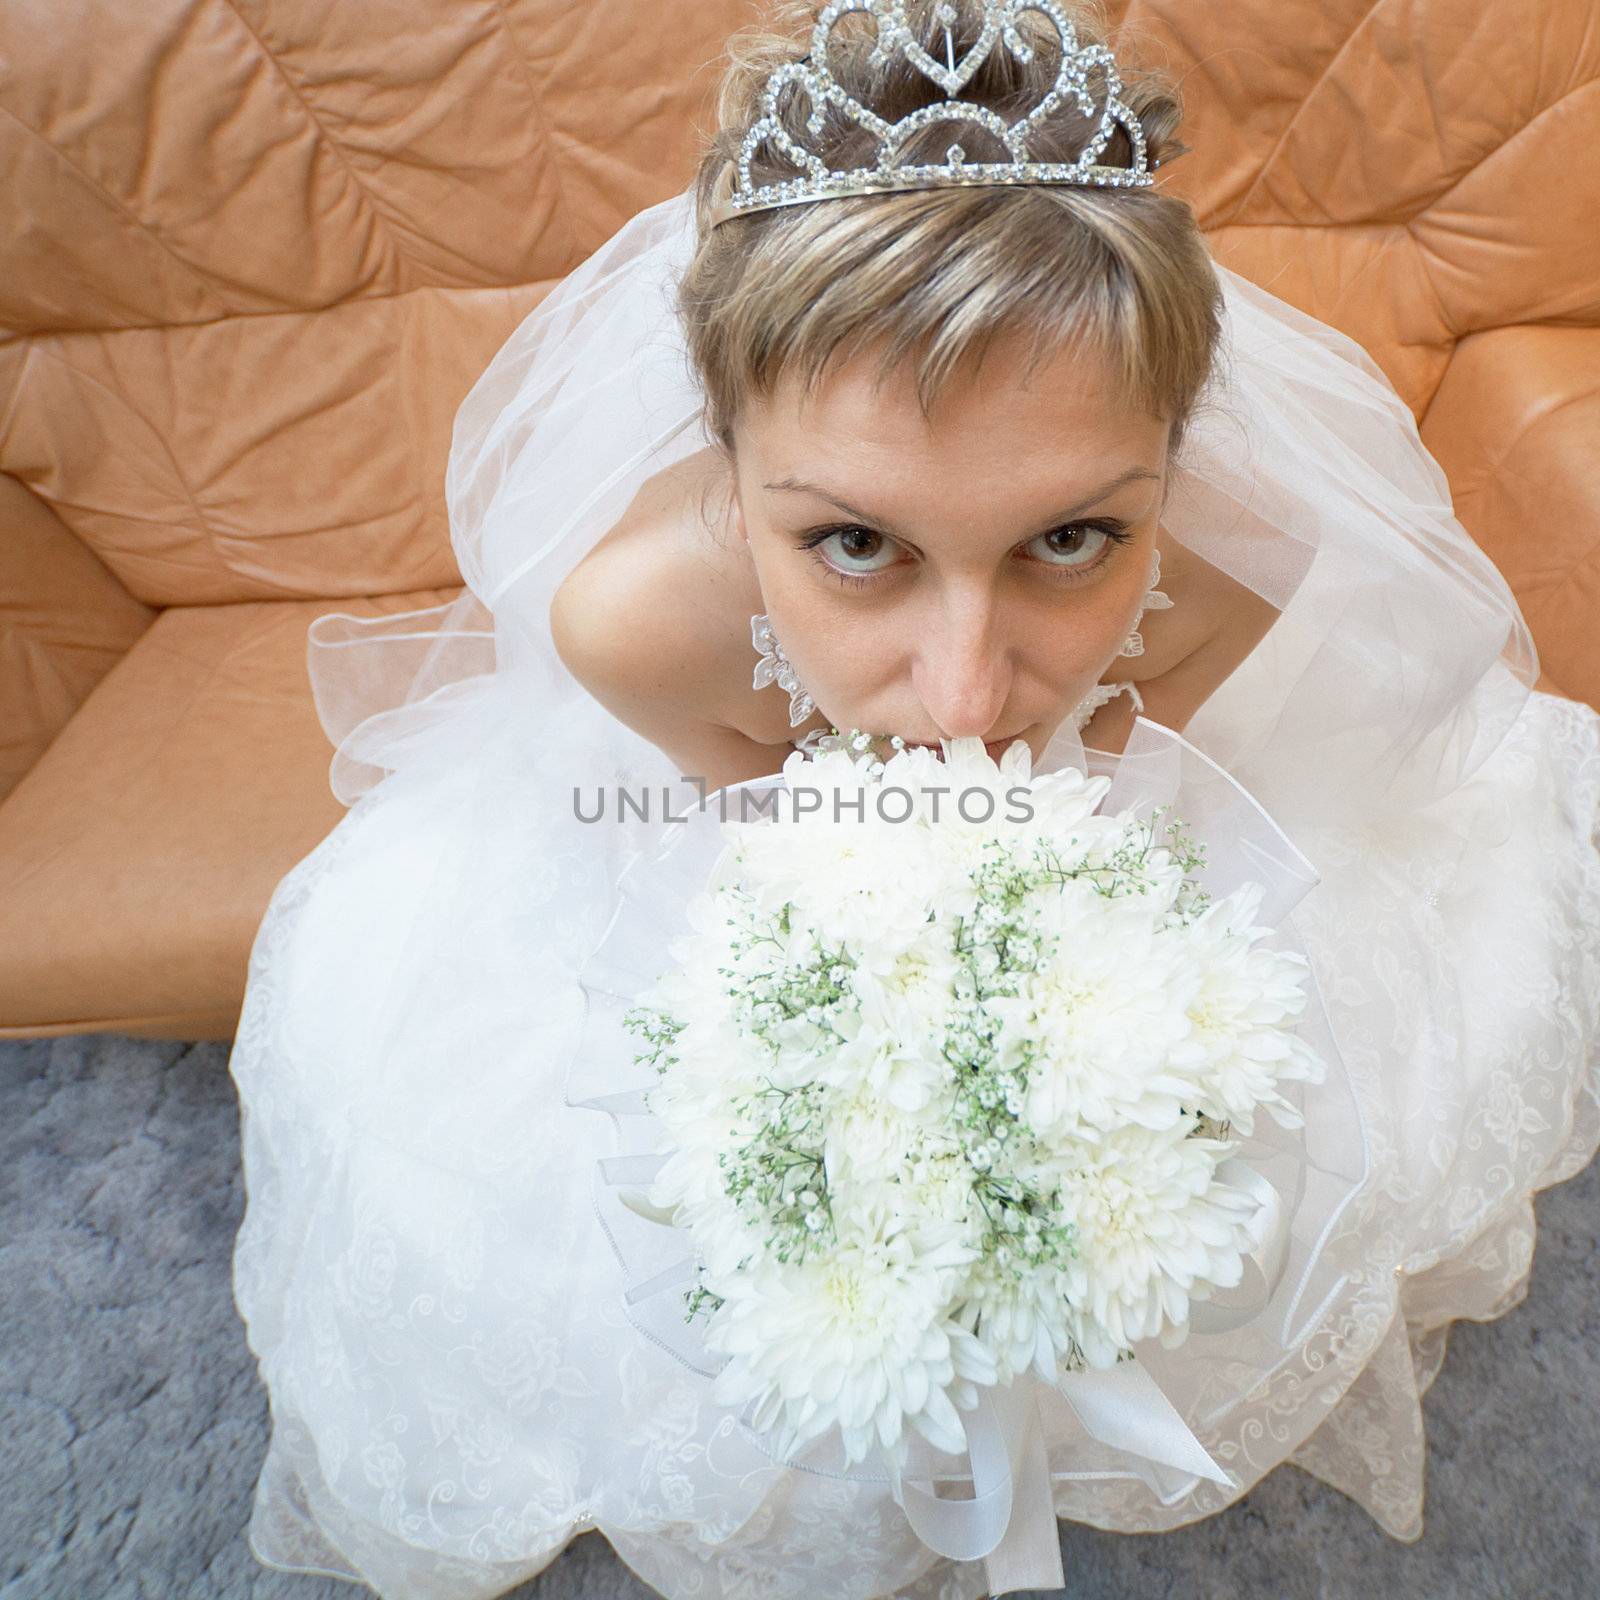 Amusing bride sits on sofa with bouquet - top view by pzaxe